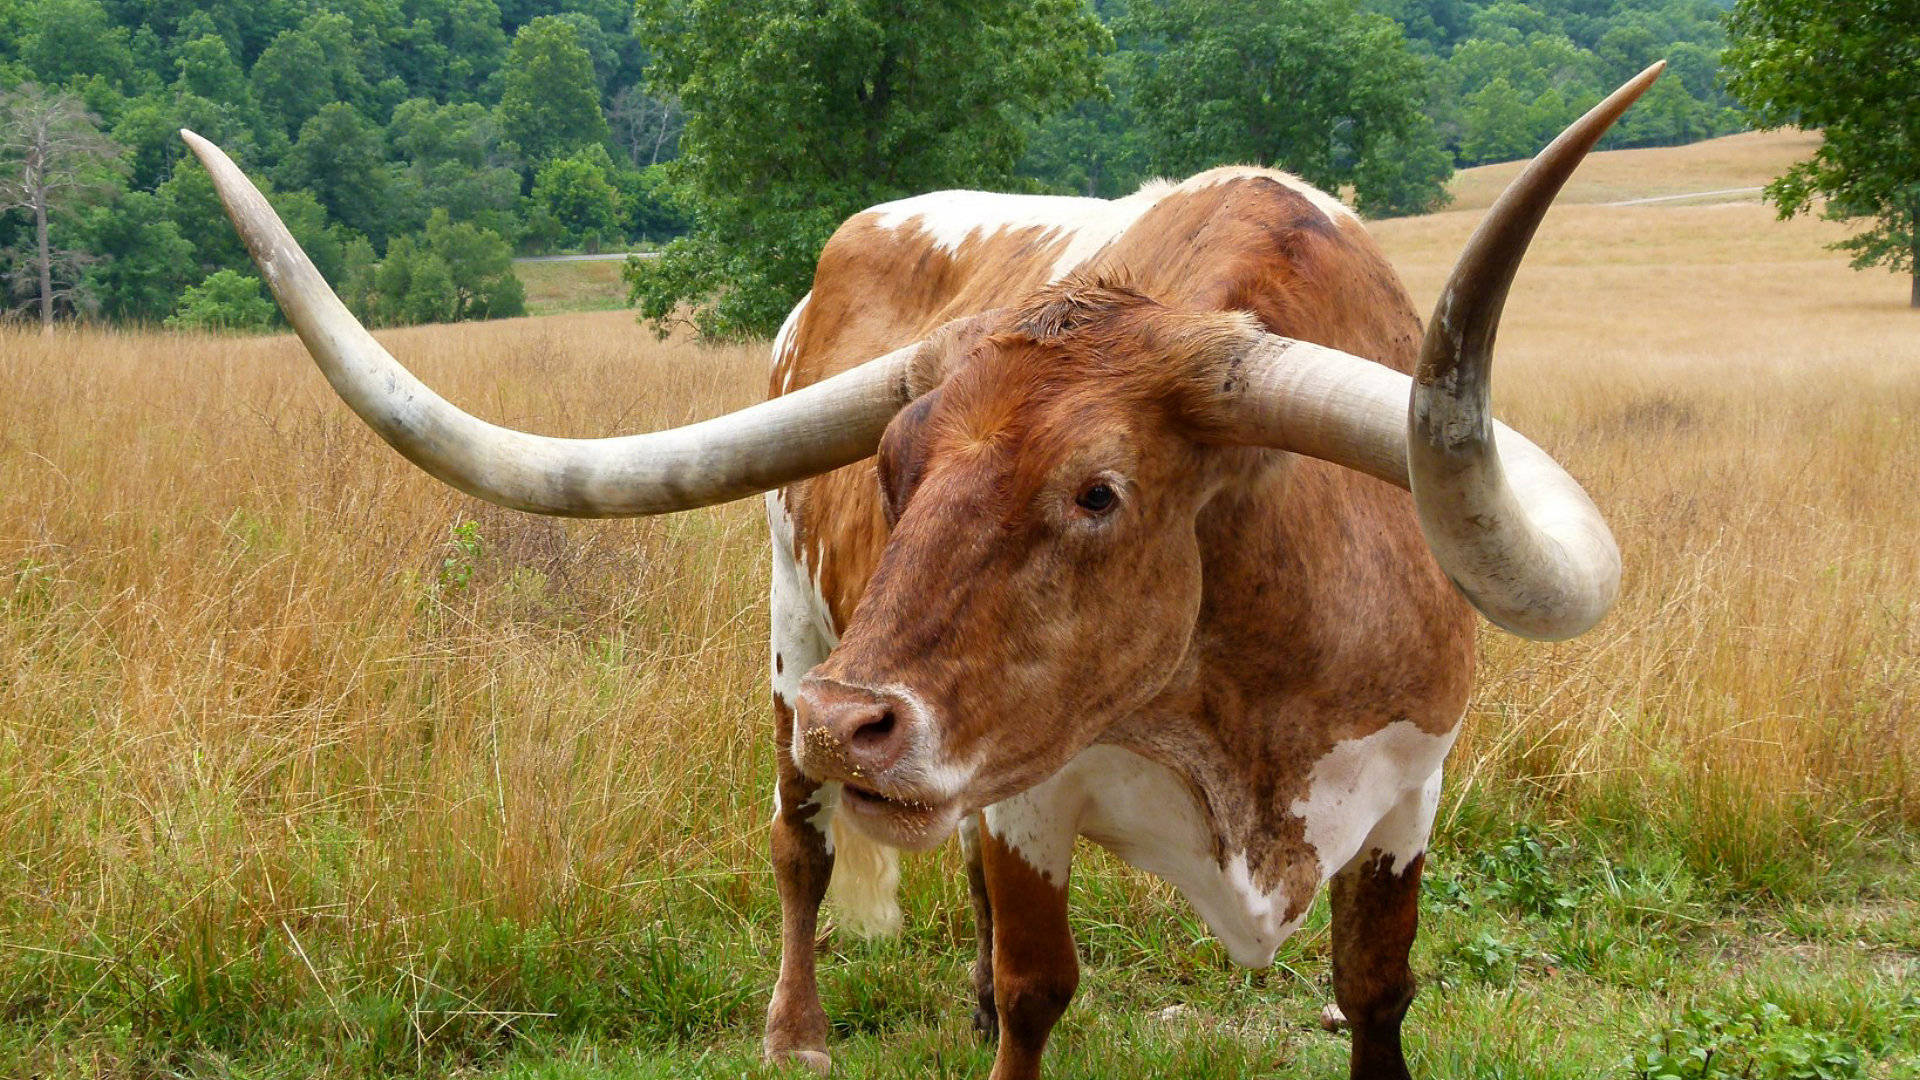 Cute Brown Cow With Curved Horns On Grass Background